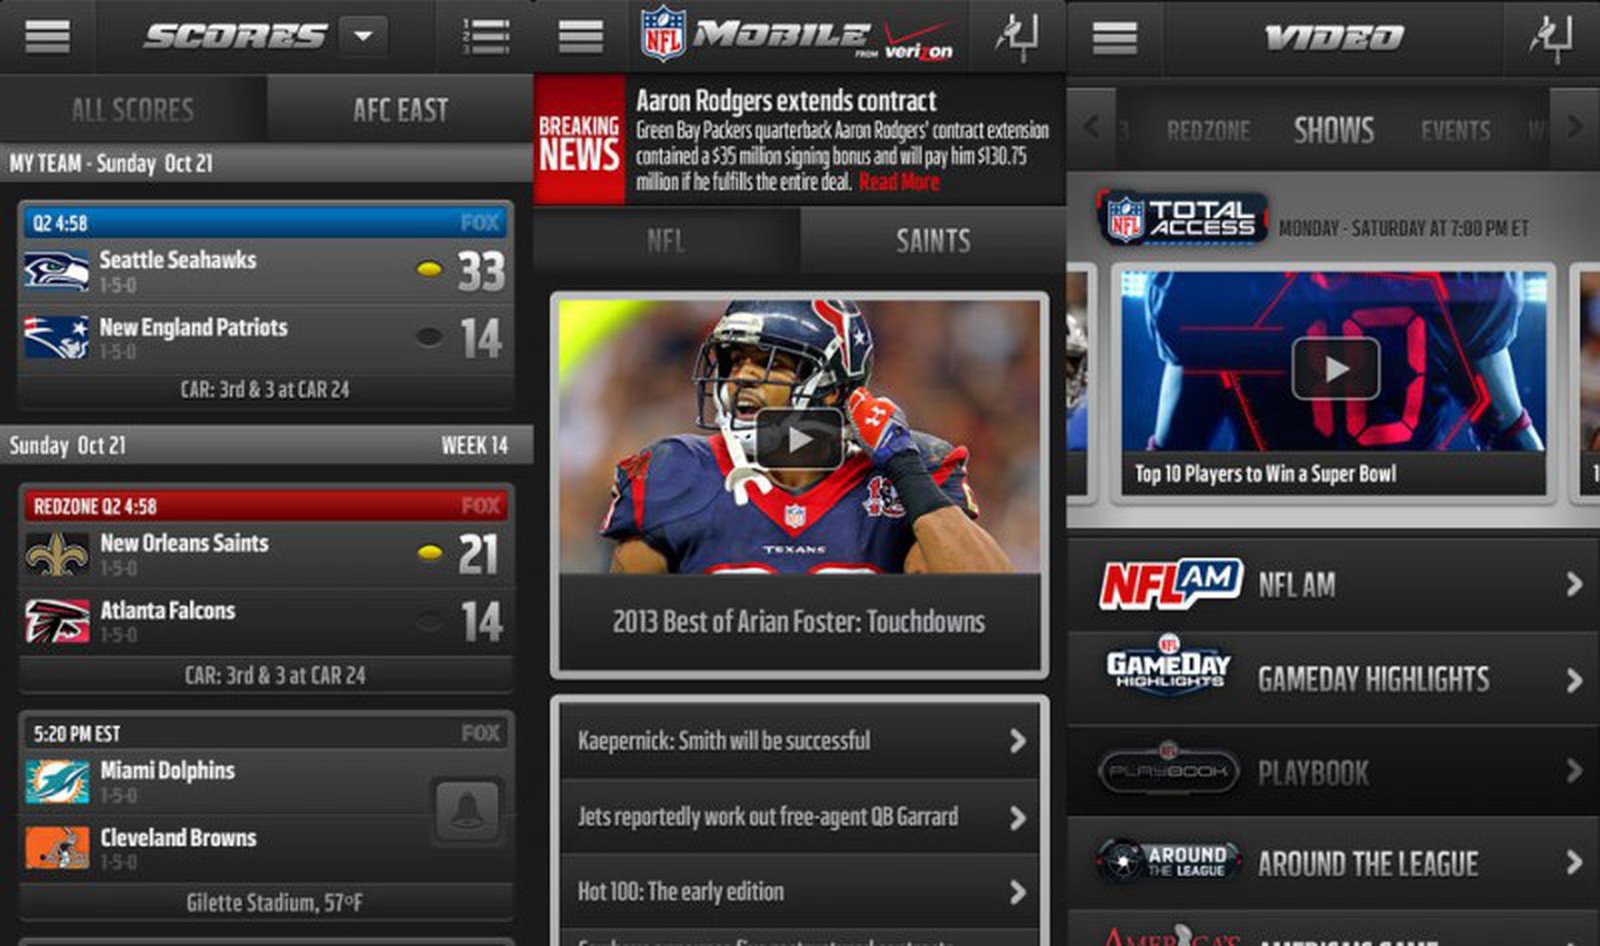 NFL Updates iOS App with Visual Redesign, Live Streaming Options Still